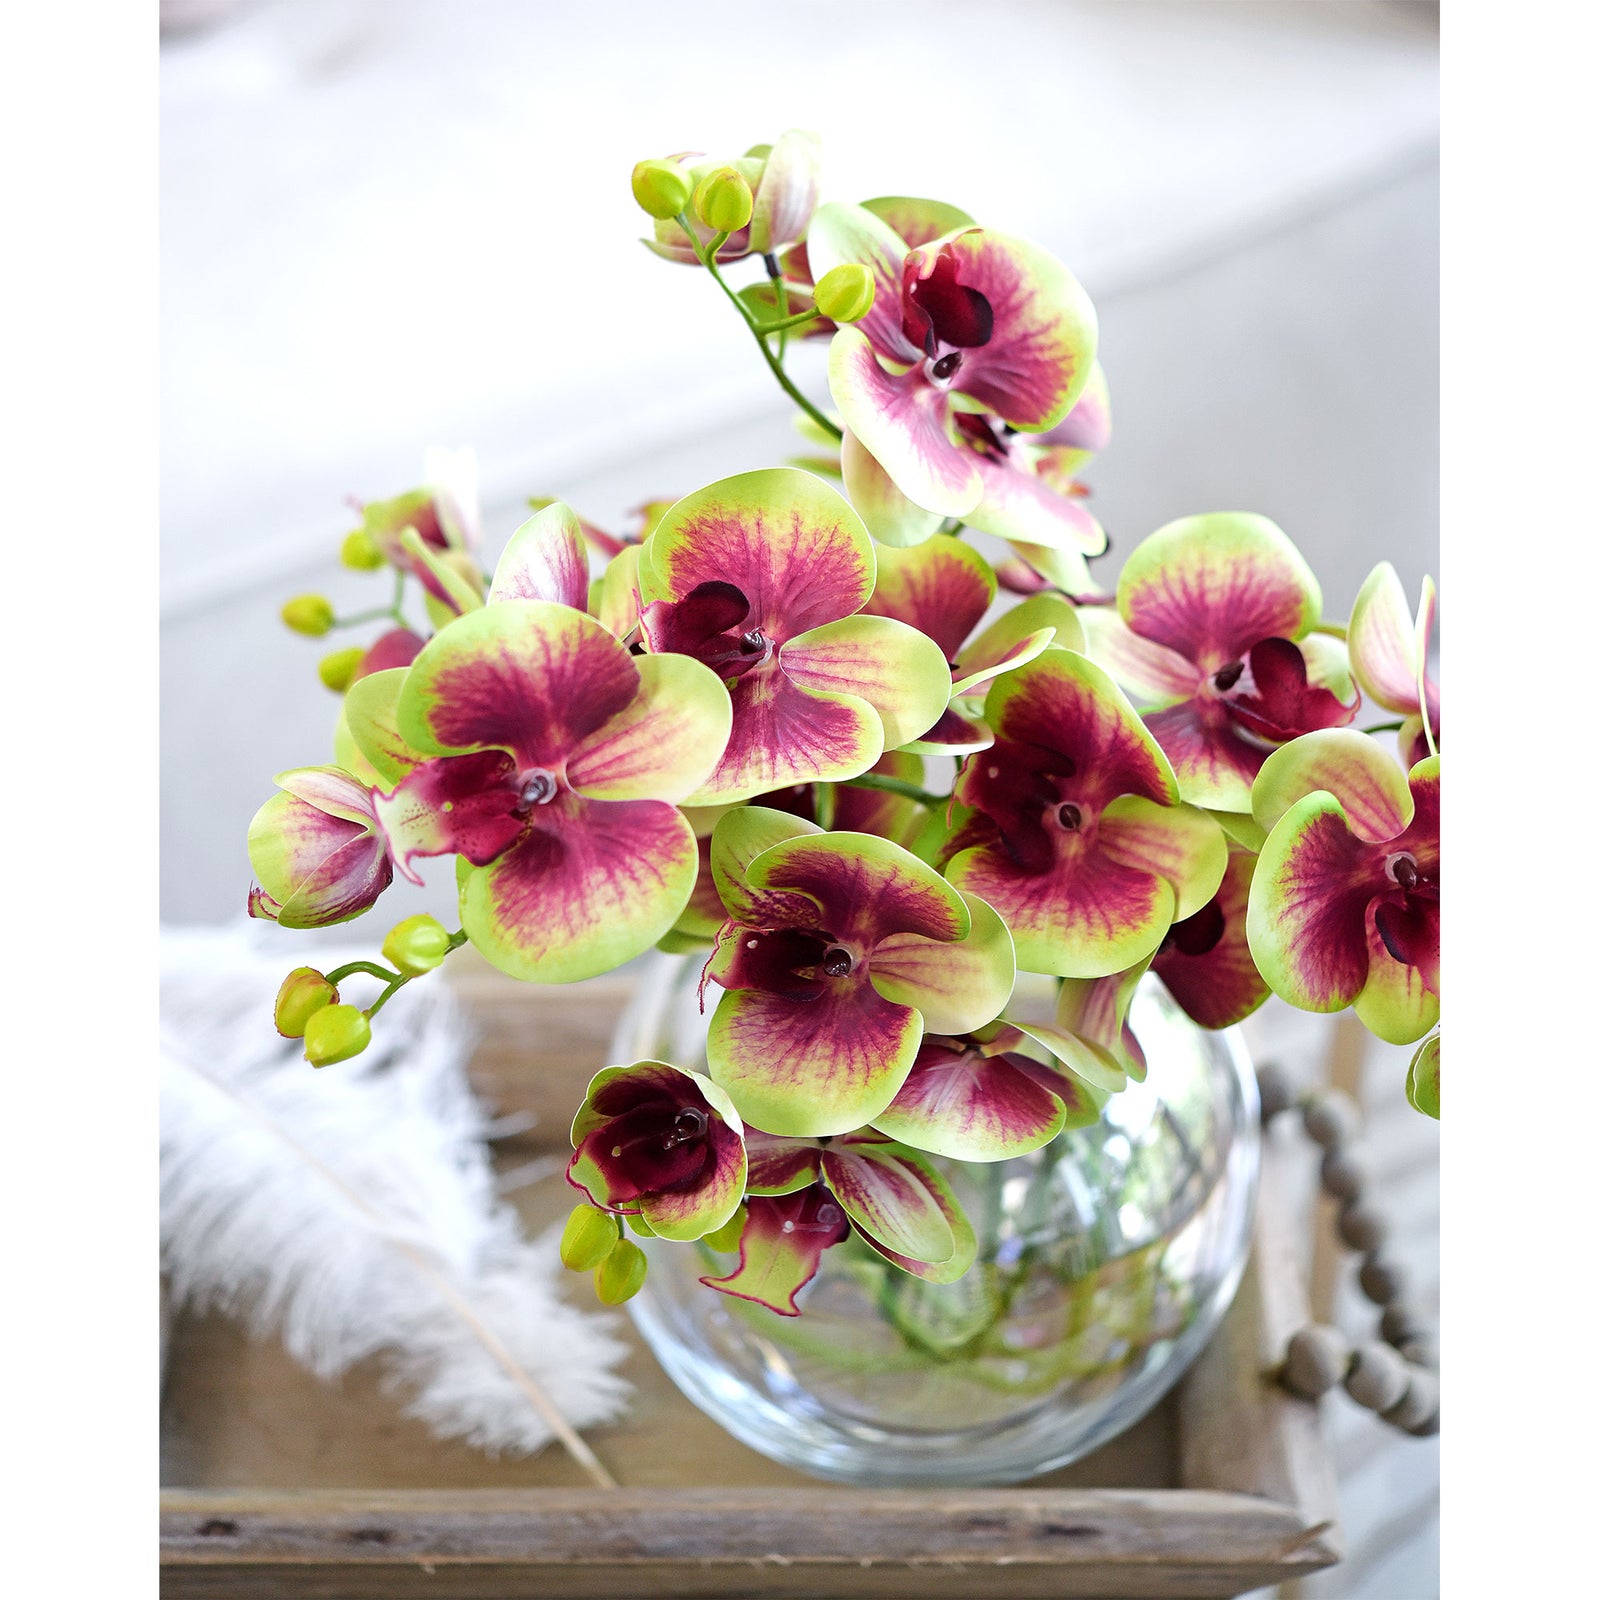 Blush Berry Apple 2 Stems Real Touch Artificial Butterfly Orchids/Moth Orchid/Phalaenopsis Flowers 27.6" Tall 70cm